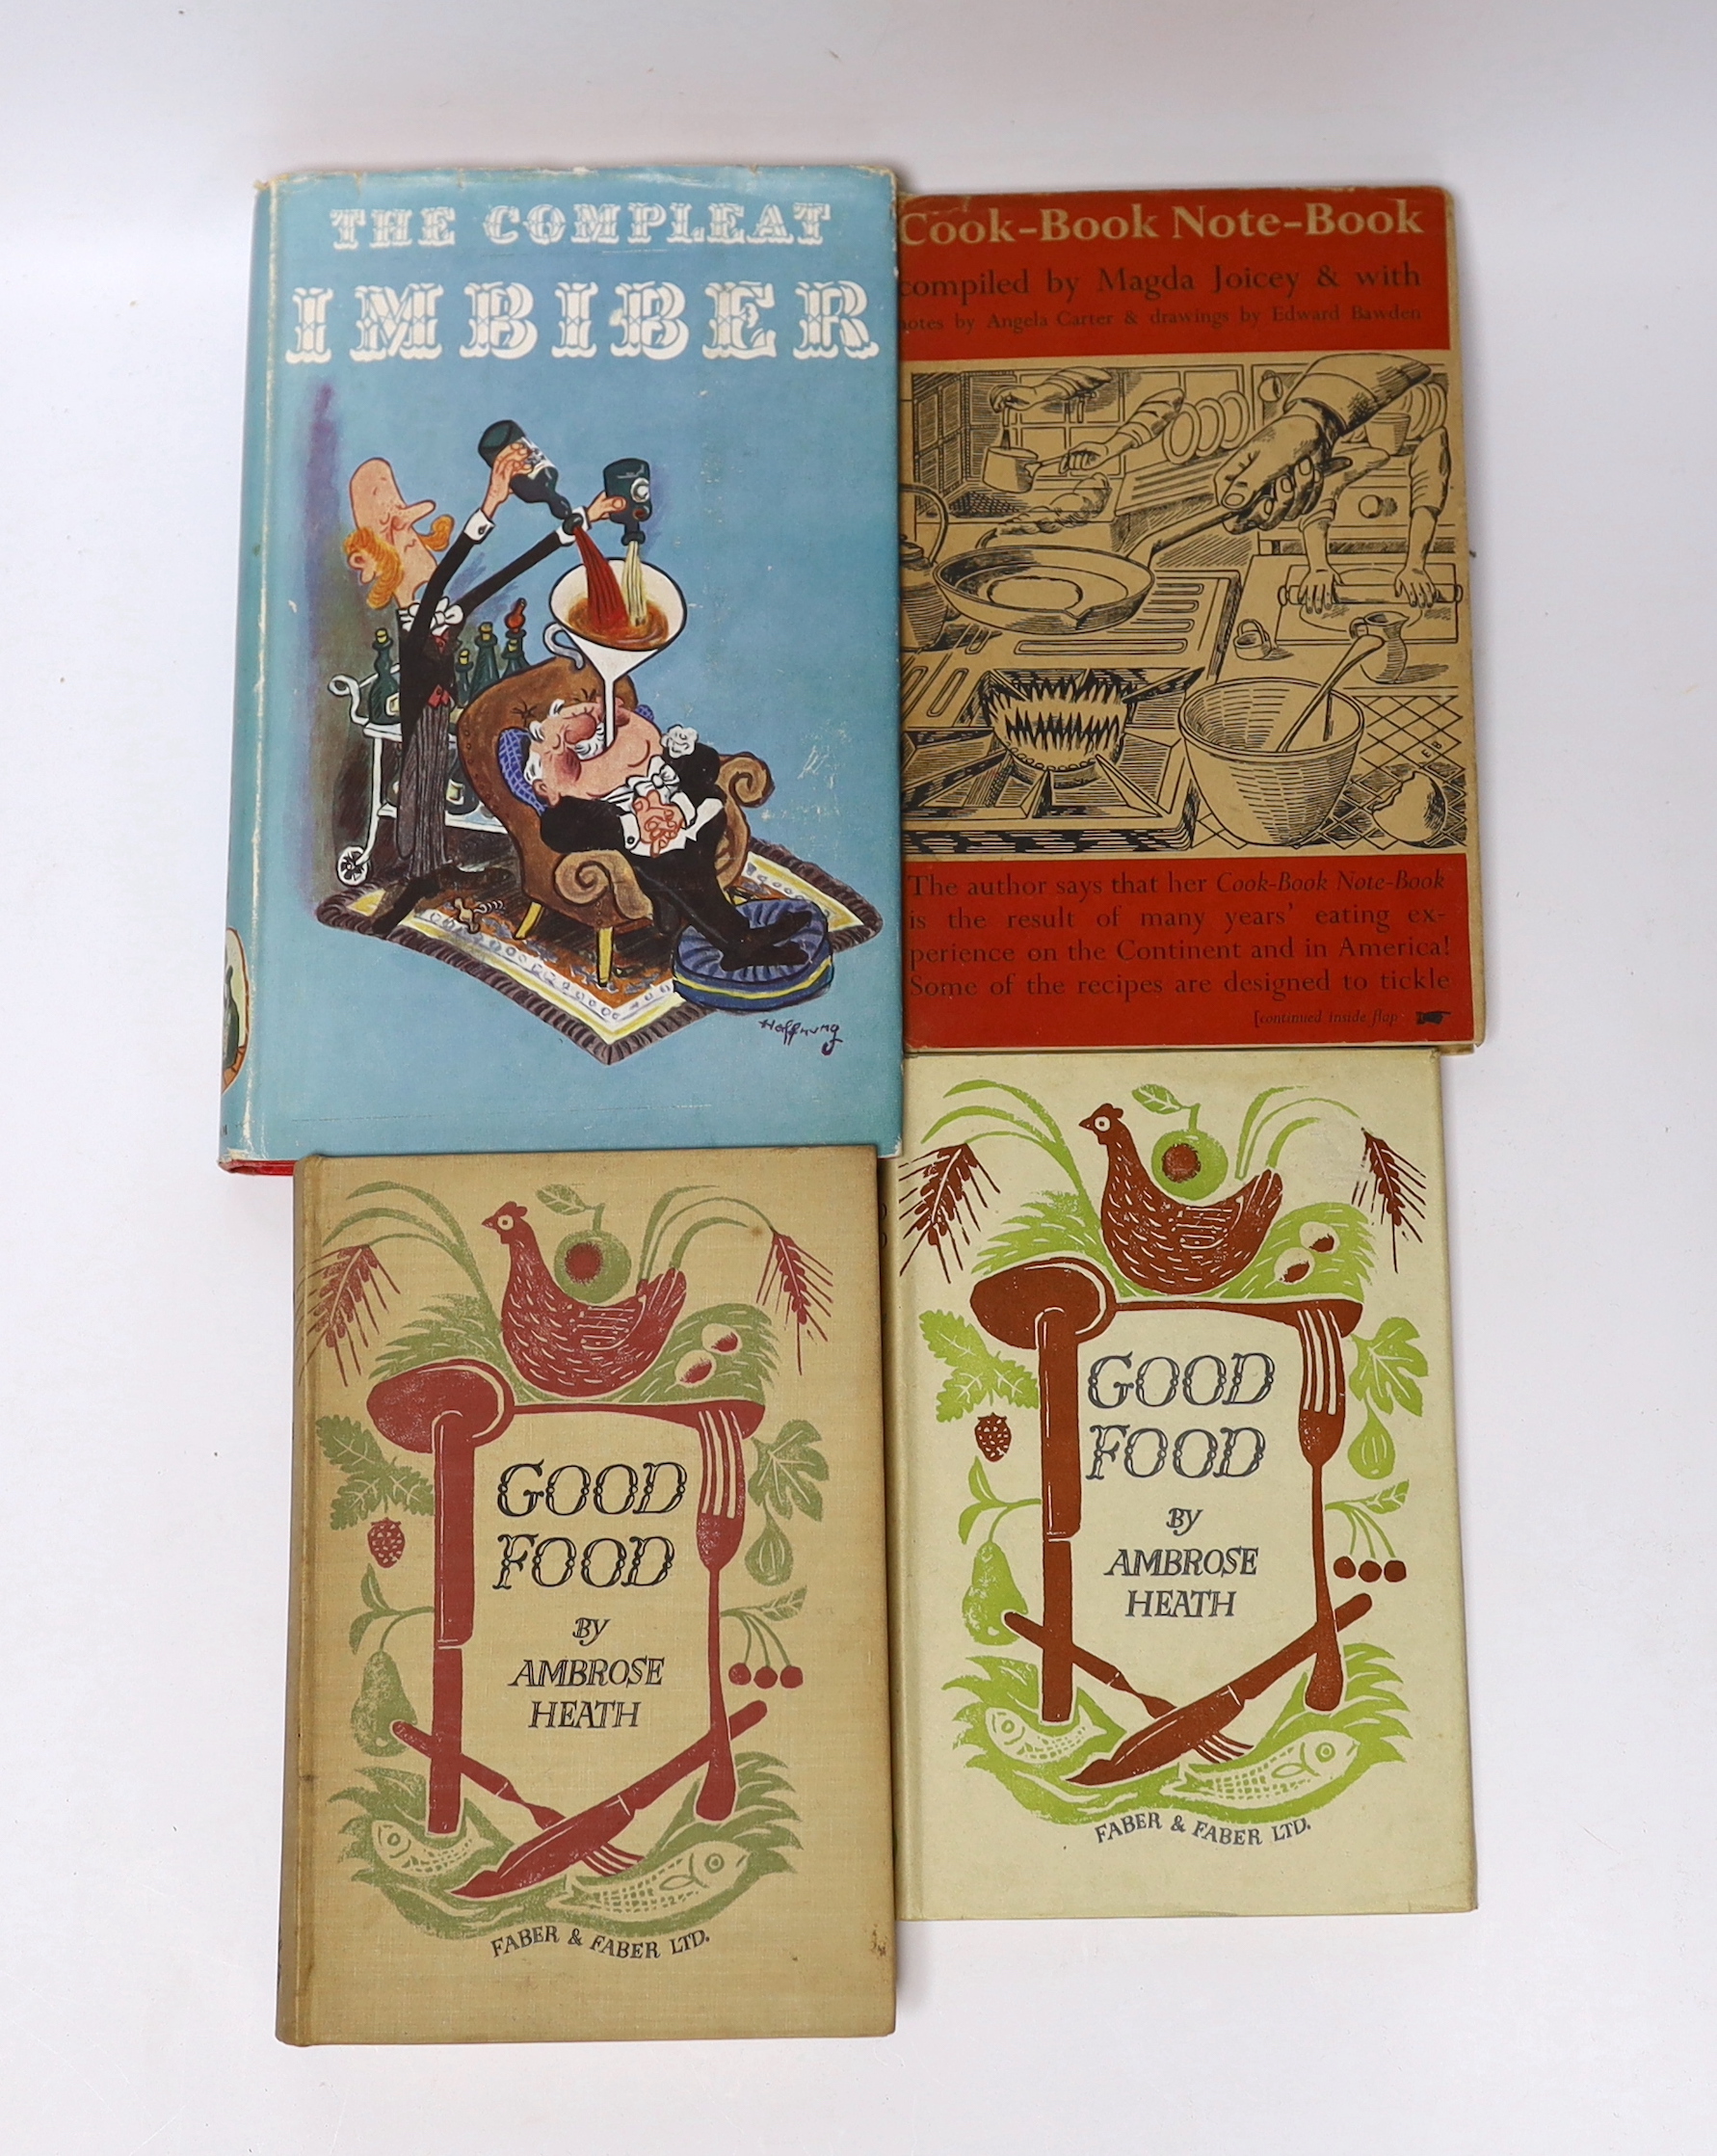 Bawden, Edward - Eight works with dust jackets and illustrations by Edward Bawden, consisting - Heath, Ambrose - 6 works, Good Food, 1932 and another copy, 1944; More Good Food, with clipped d/j, 1933; Good Savouries, 19